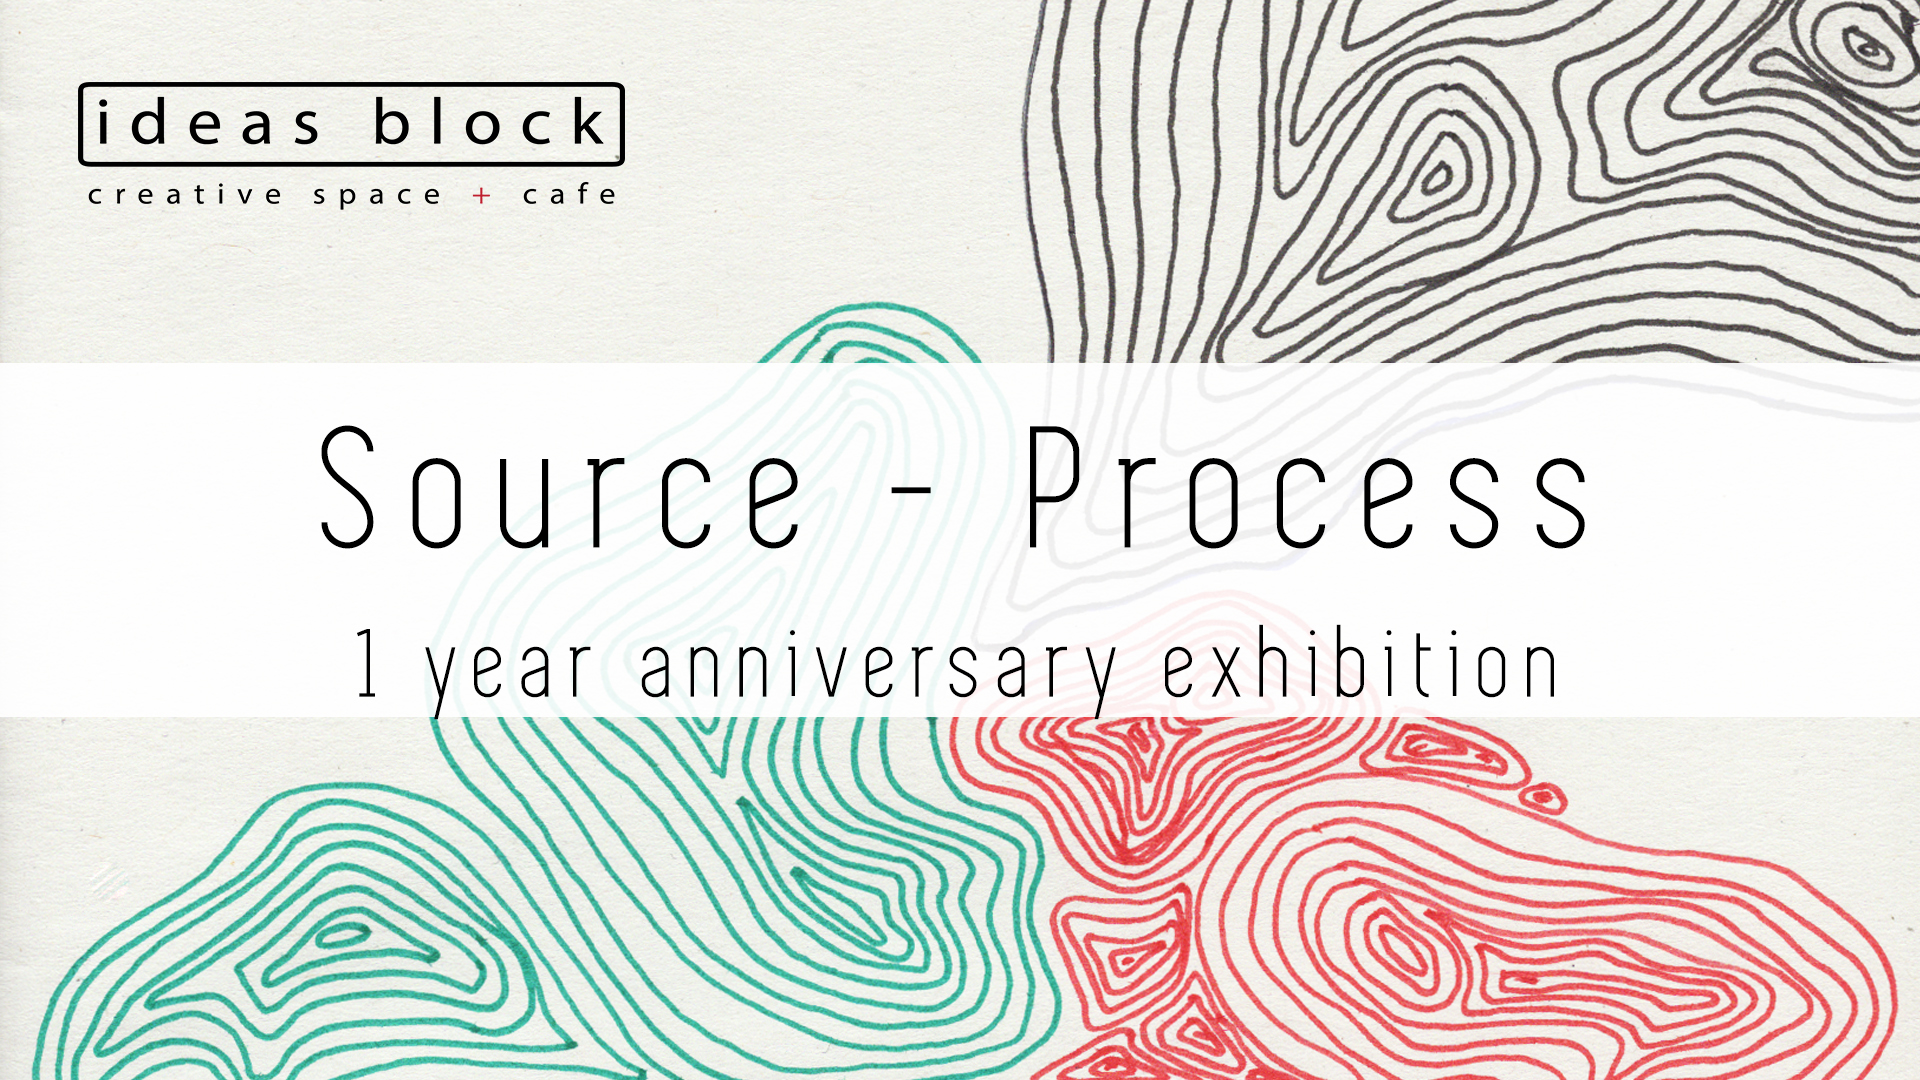 Source - Process collective anniversary exhibition